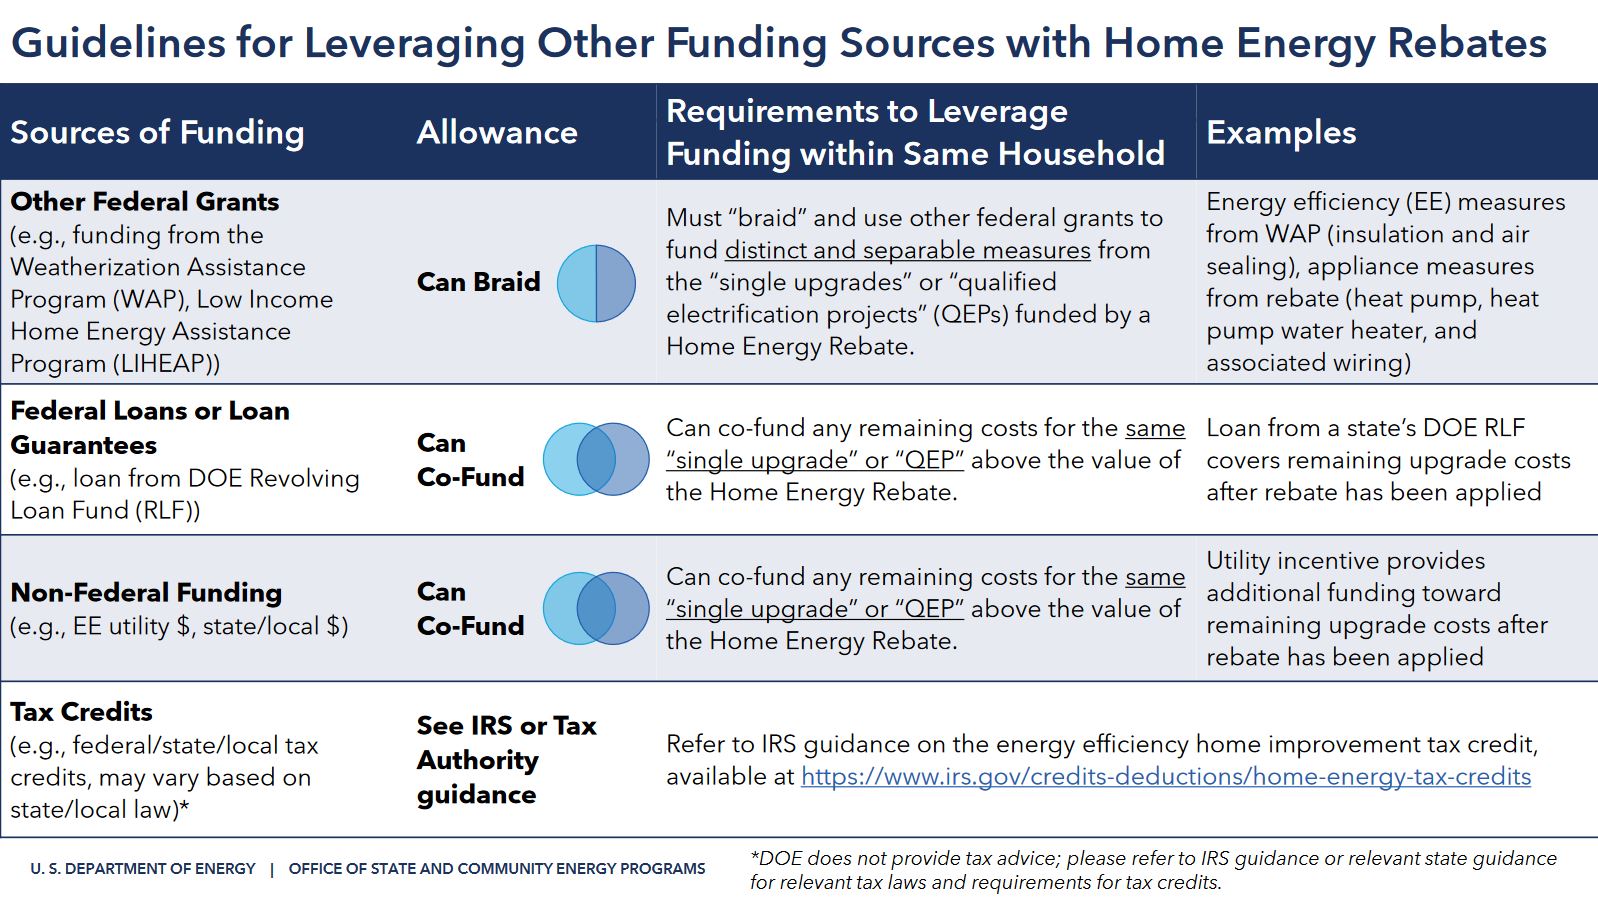 Guidelines for Leveraging Other Funding Sources from the Department of Energy